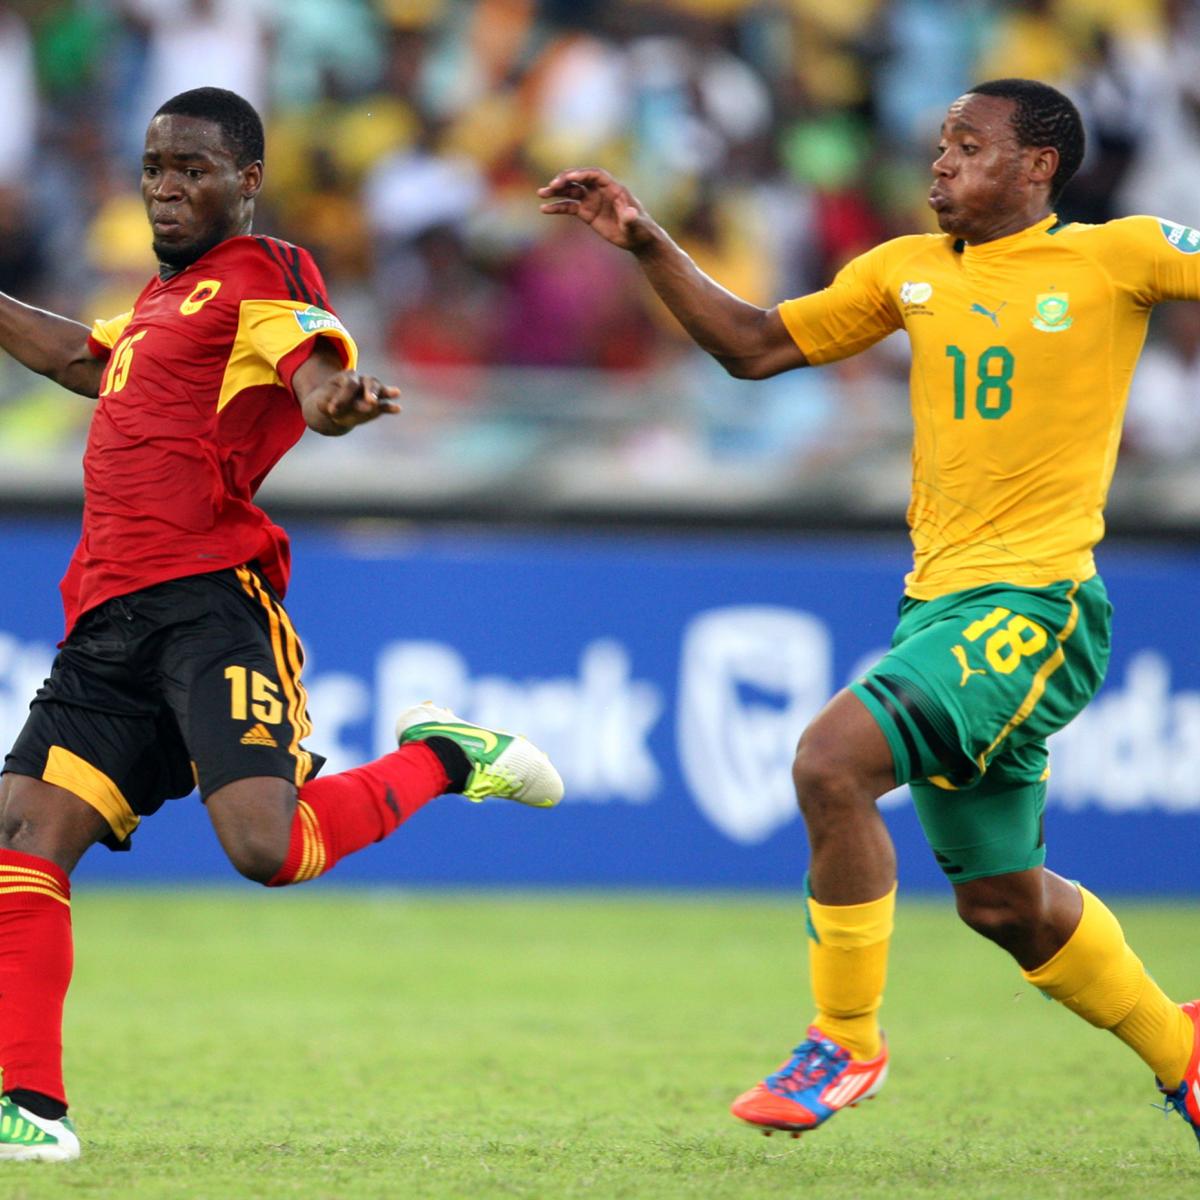 Africa Cup of Nations 2013 TV Schedule: Day 9 Live Stream Info and